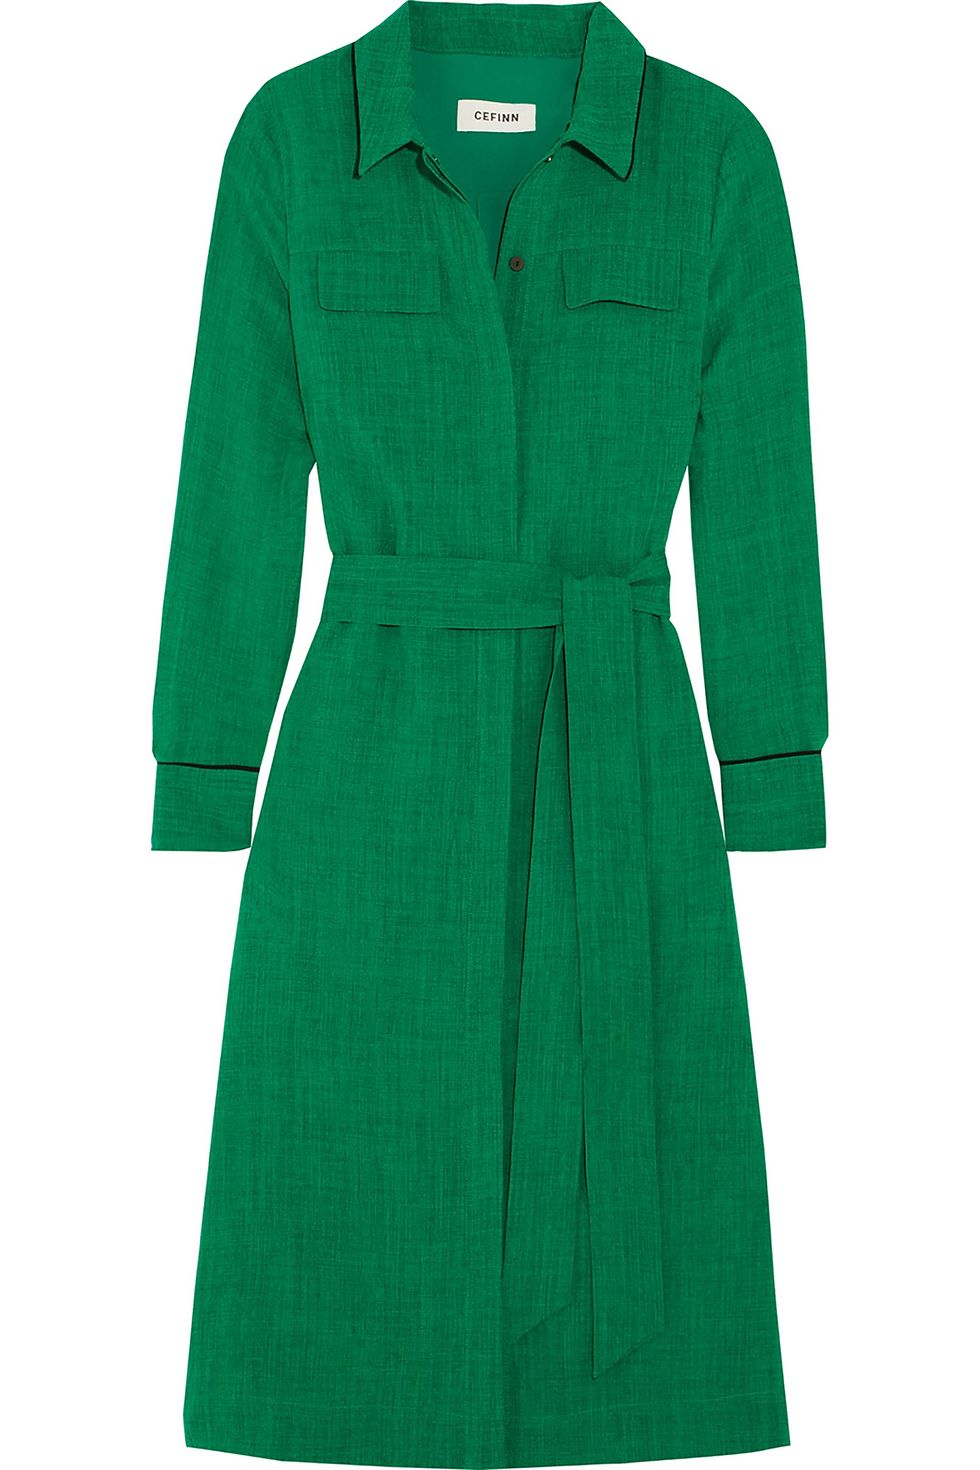 Clothing, Green, Sleeve, Coat, Day dress, Trench coat, Outerwear, Dress, Overcoat, Collar, 